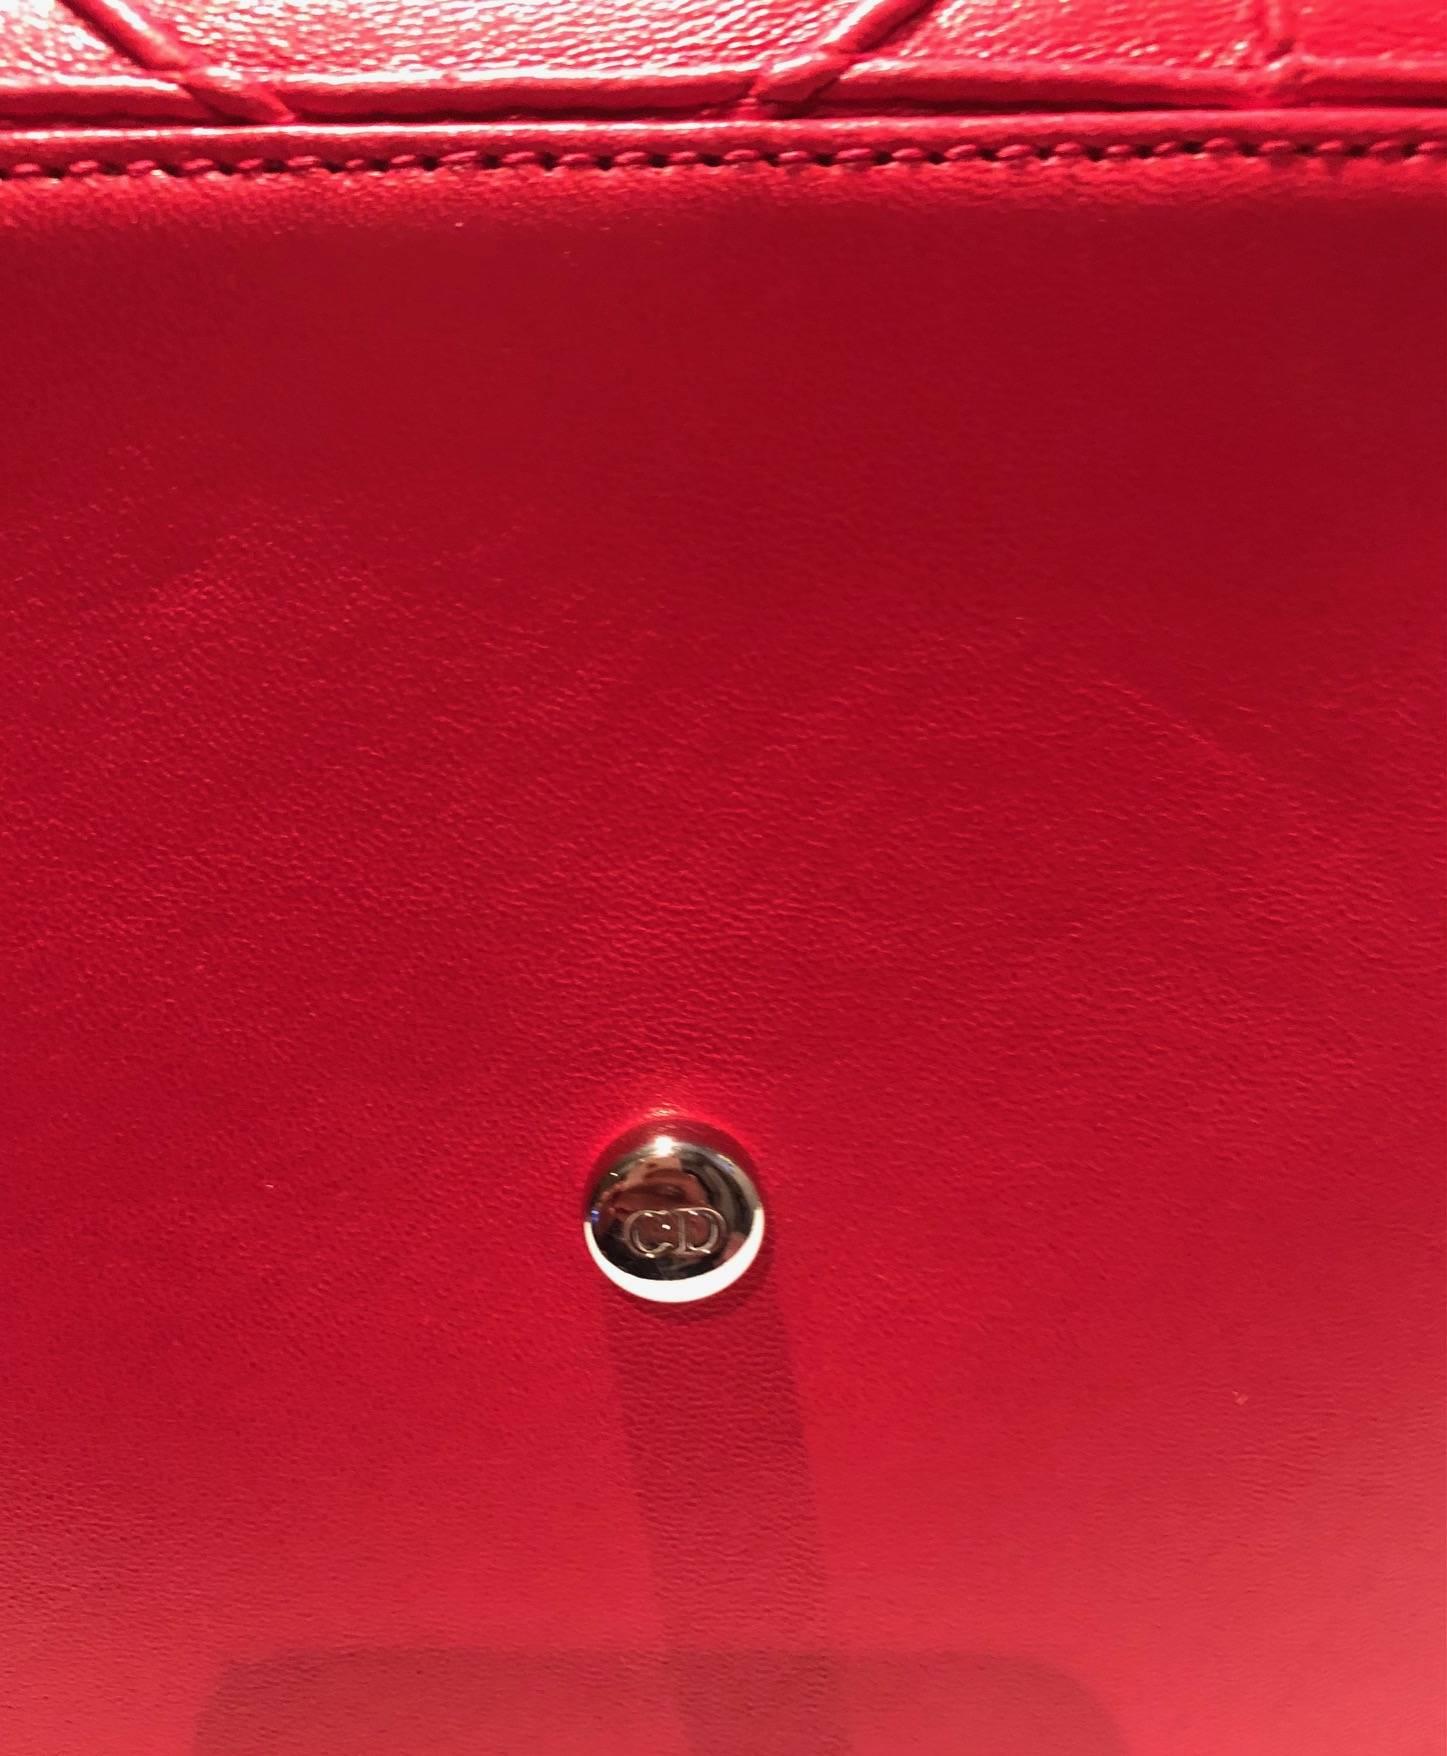 Christian Dior Granville Calfskin Red Leather Tote Bag with multicolor strap 10